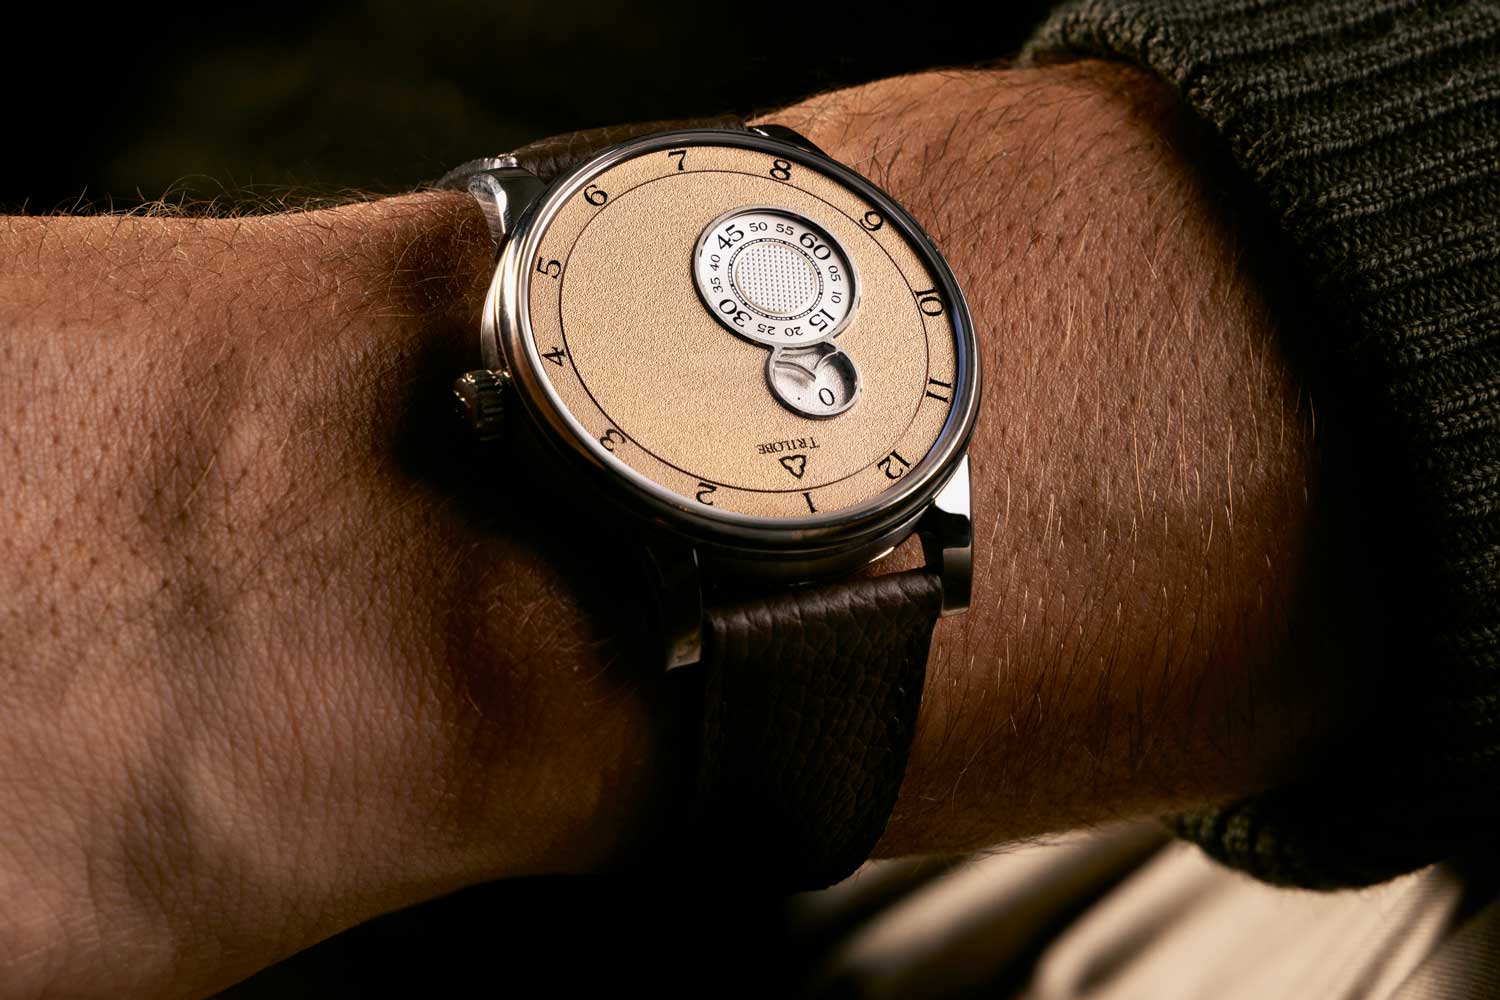 Nuit Fantastique, seen here in a sandy “Dune” dial, brings a pure and unadulterated time-telling experience